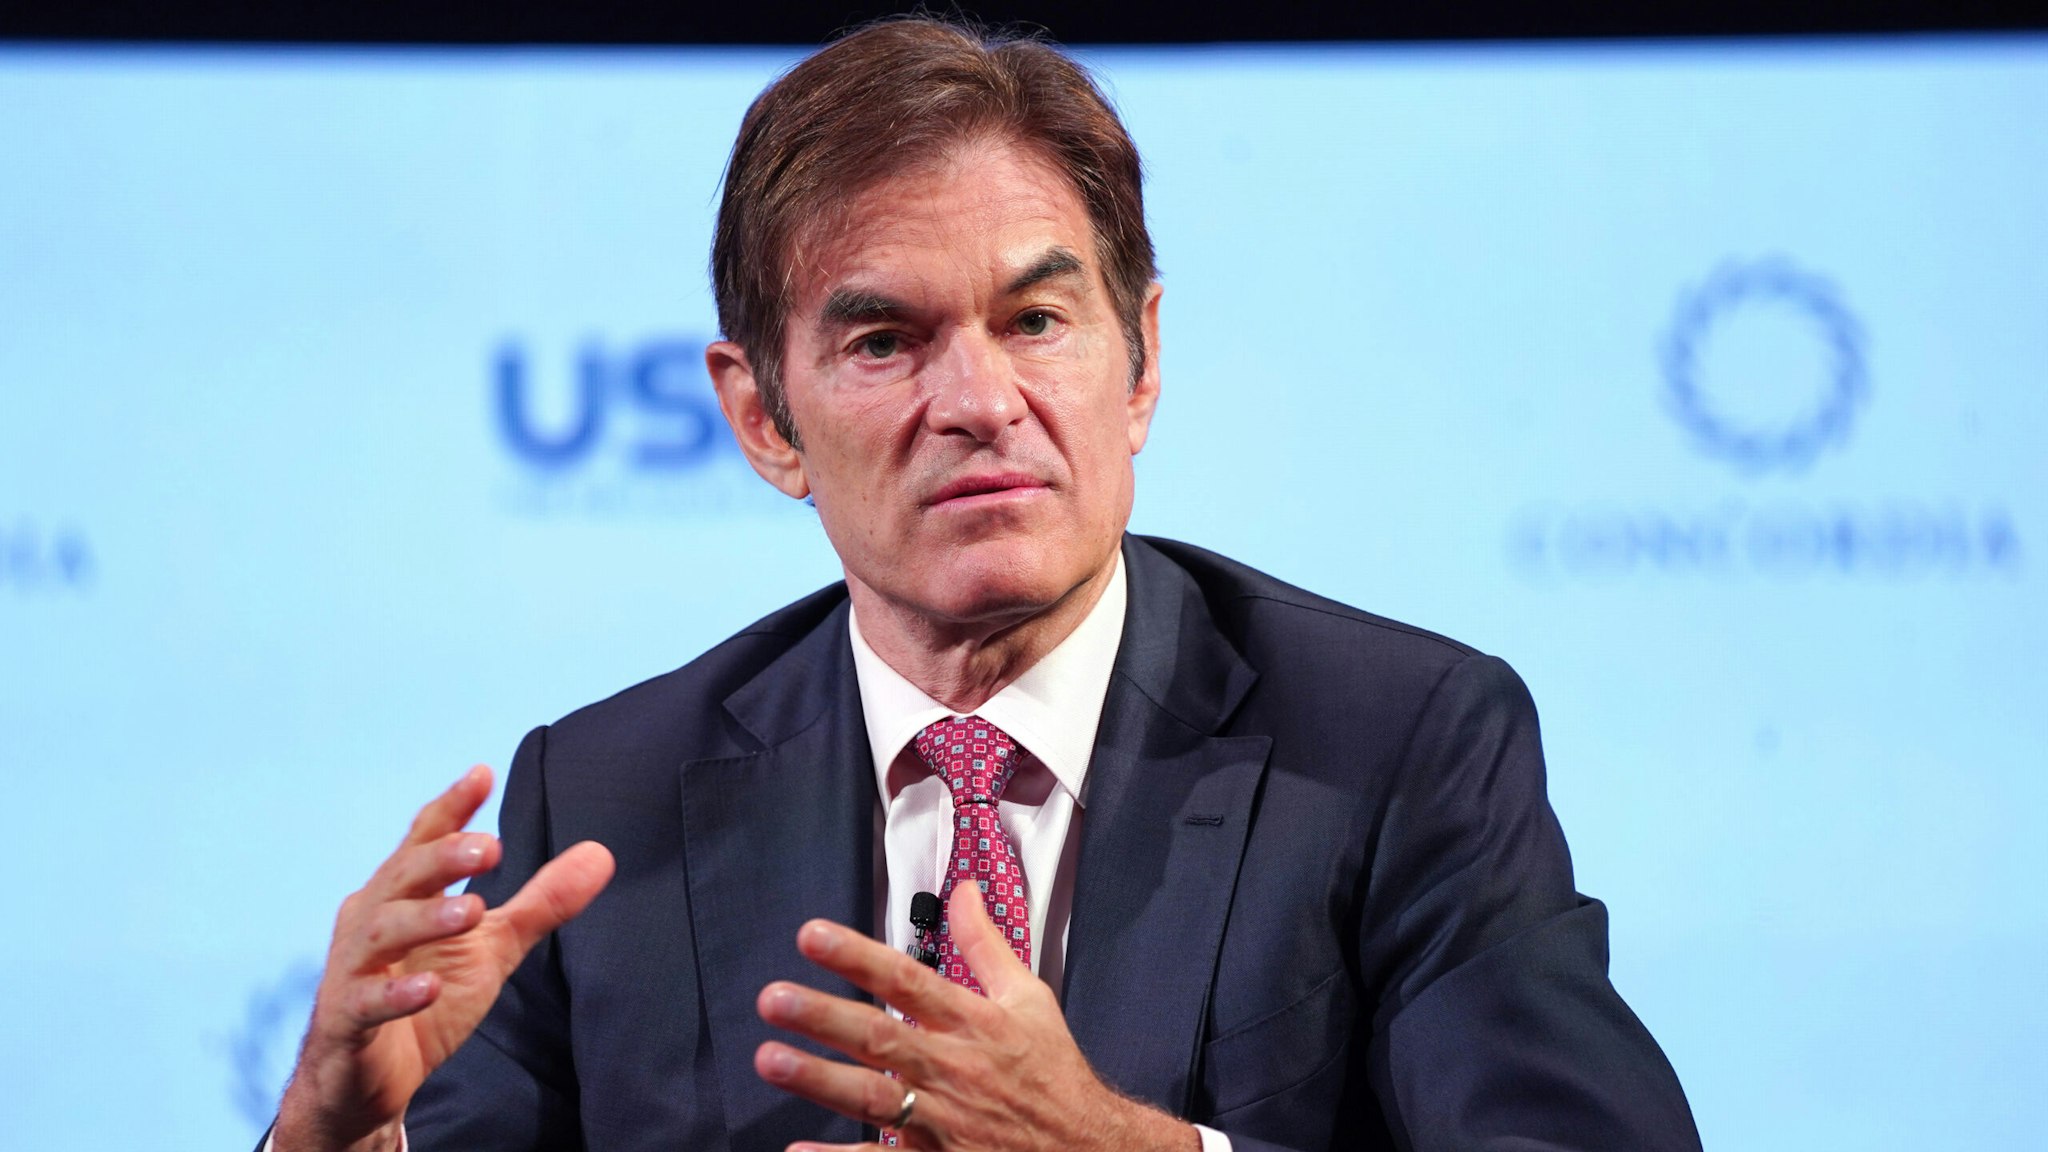 NEW YORK, NEW YORK - SEPTEMBER 21: Dr. Mehmet Oz, Professor of Surgery, Columbia University speaks onstage during the 2021 Concordia Annual Summit - Day 2 at Sheraton New York on September 21, 2021 in New York City.